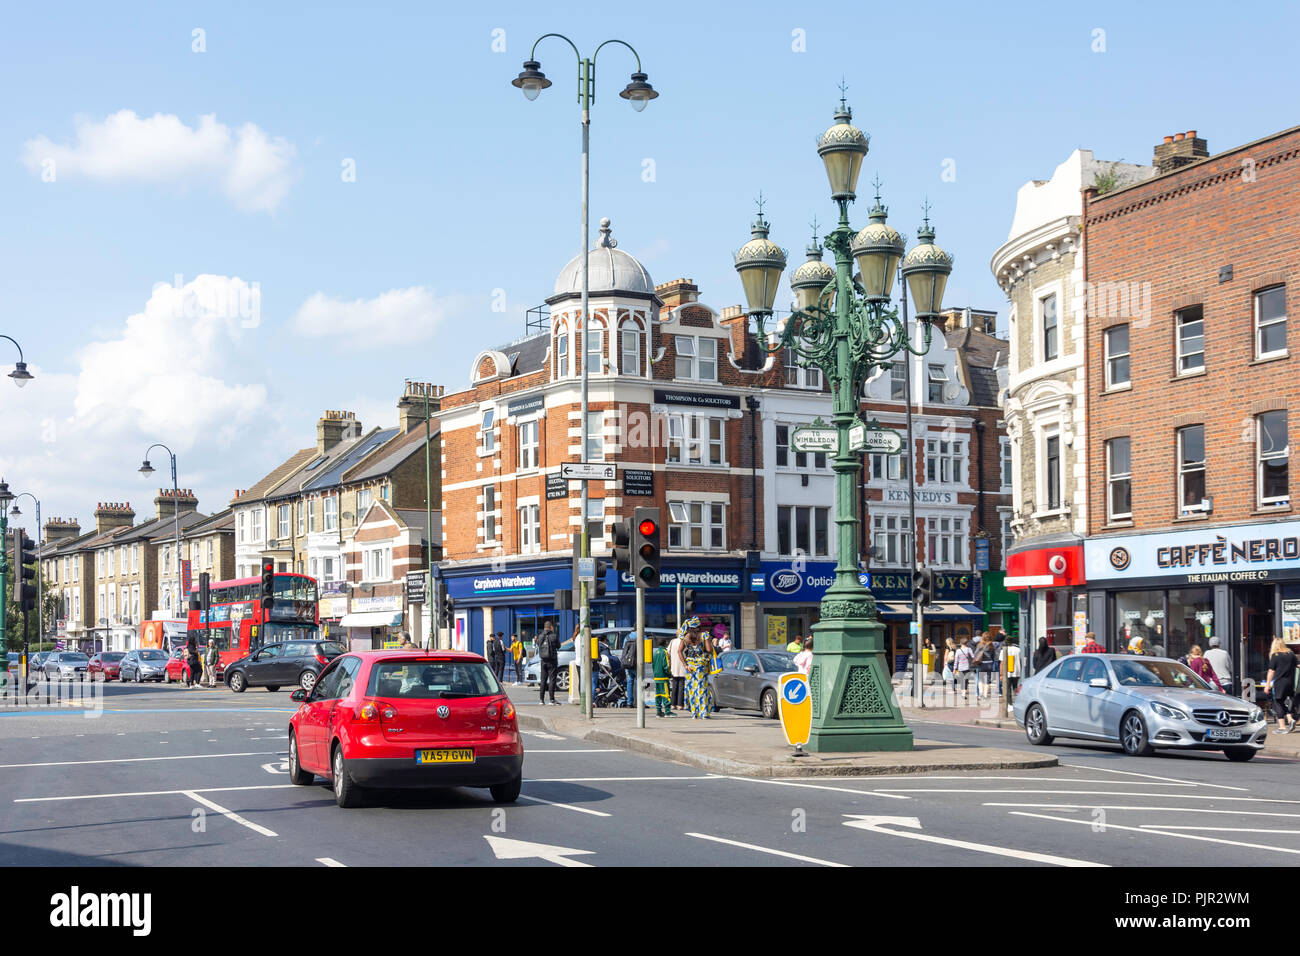 Giunzione di Tooting High Street e Mitcham Road, Tooting, London Borough of Wandsworth, Greater London, England, Regno Unito Foto Stock